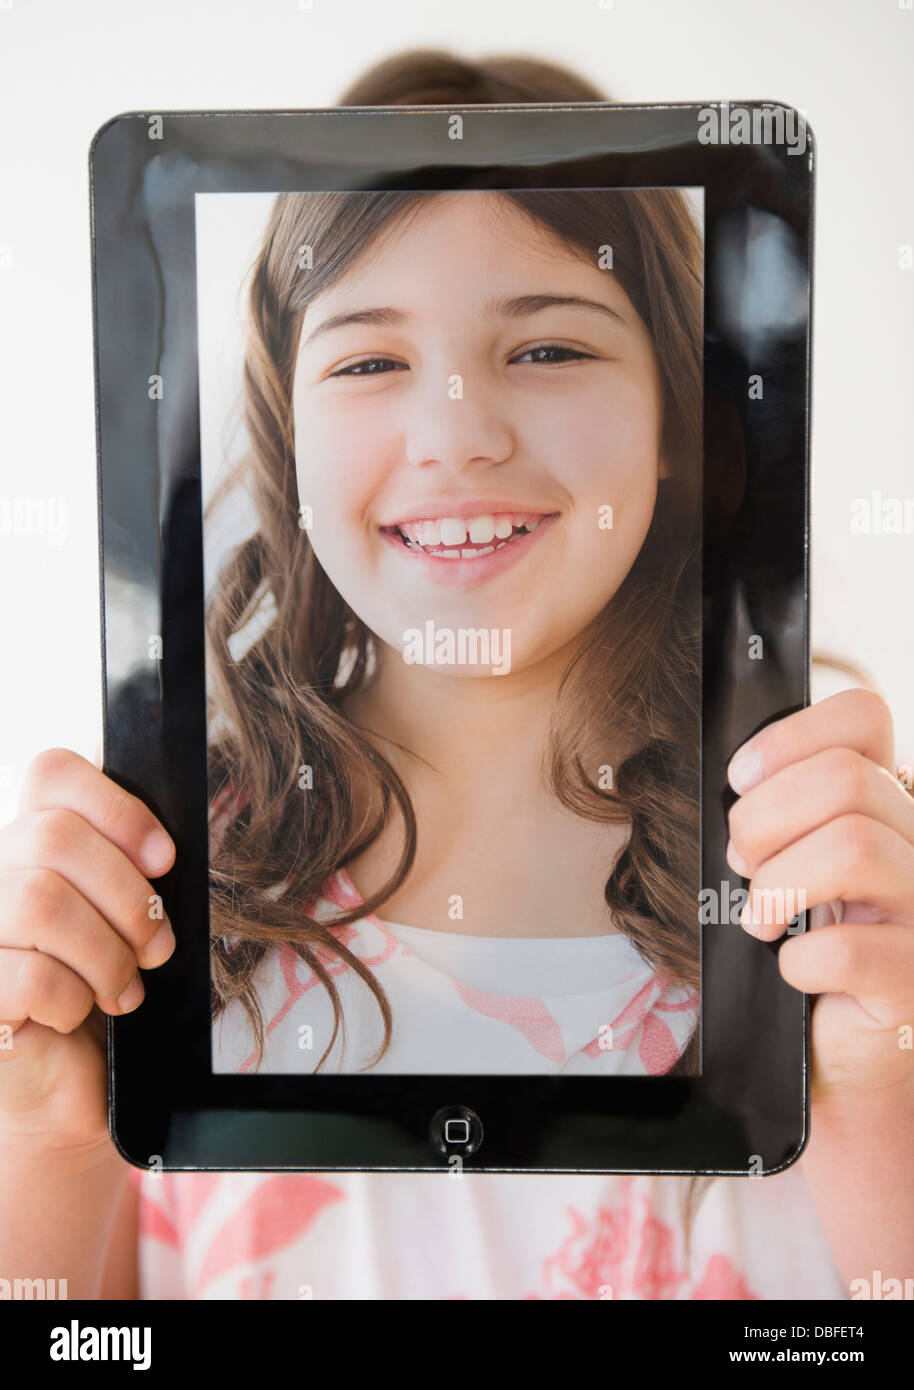 Hispanic girl holding tablet with picture of her face Stock Photo